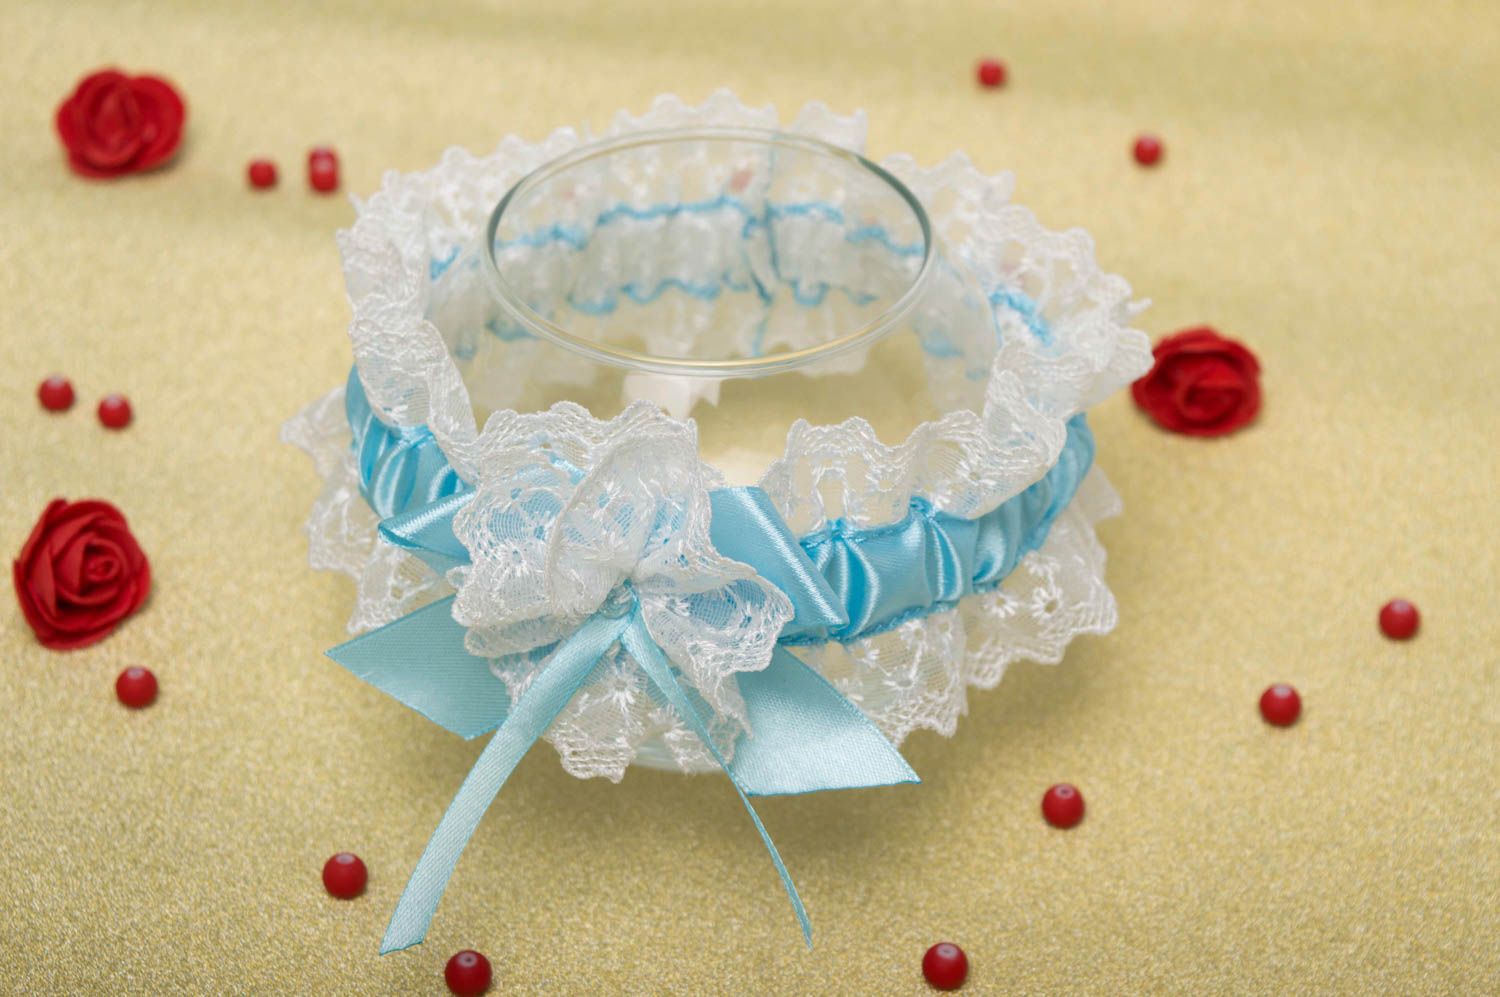 Beautiful handmade bridal garter edding accessories wedding outfit for her photo 1